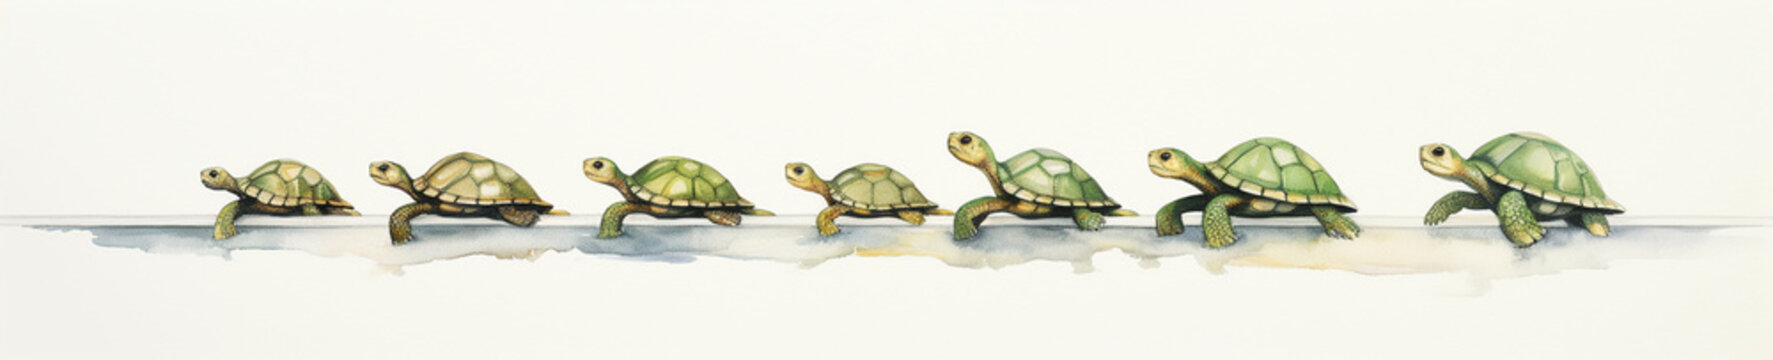 A Minimal Watercolor Banner of a Row of Turtles on a White Background